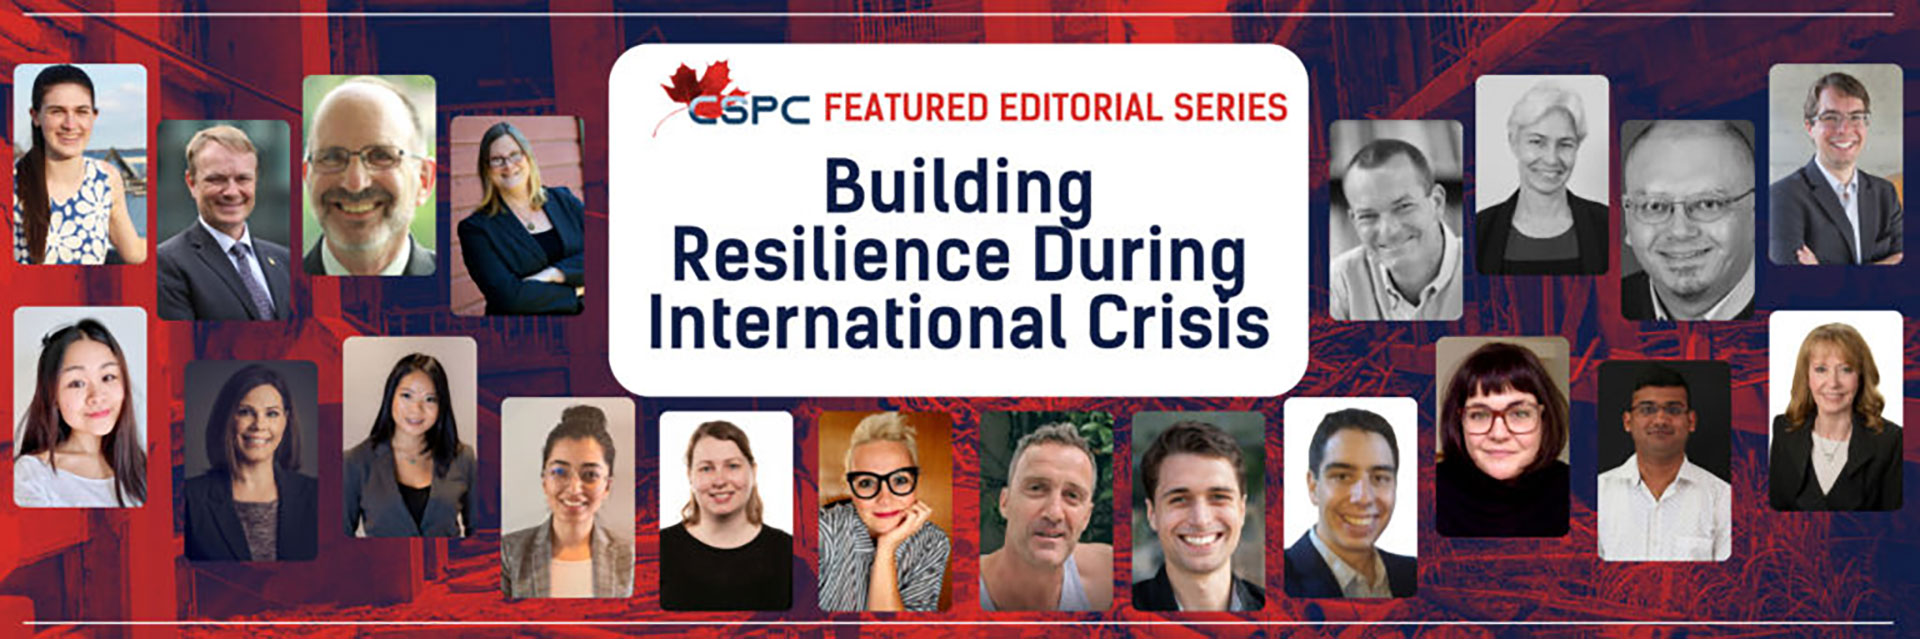 Building Resilience During International Crisis